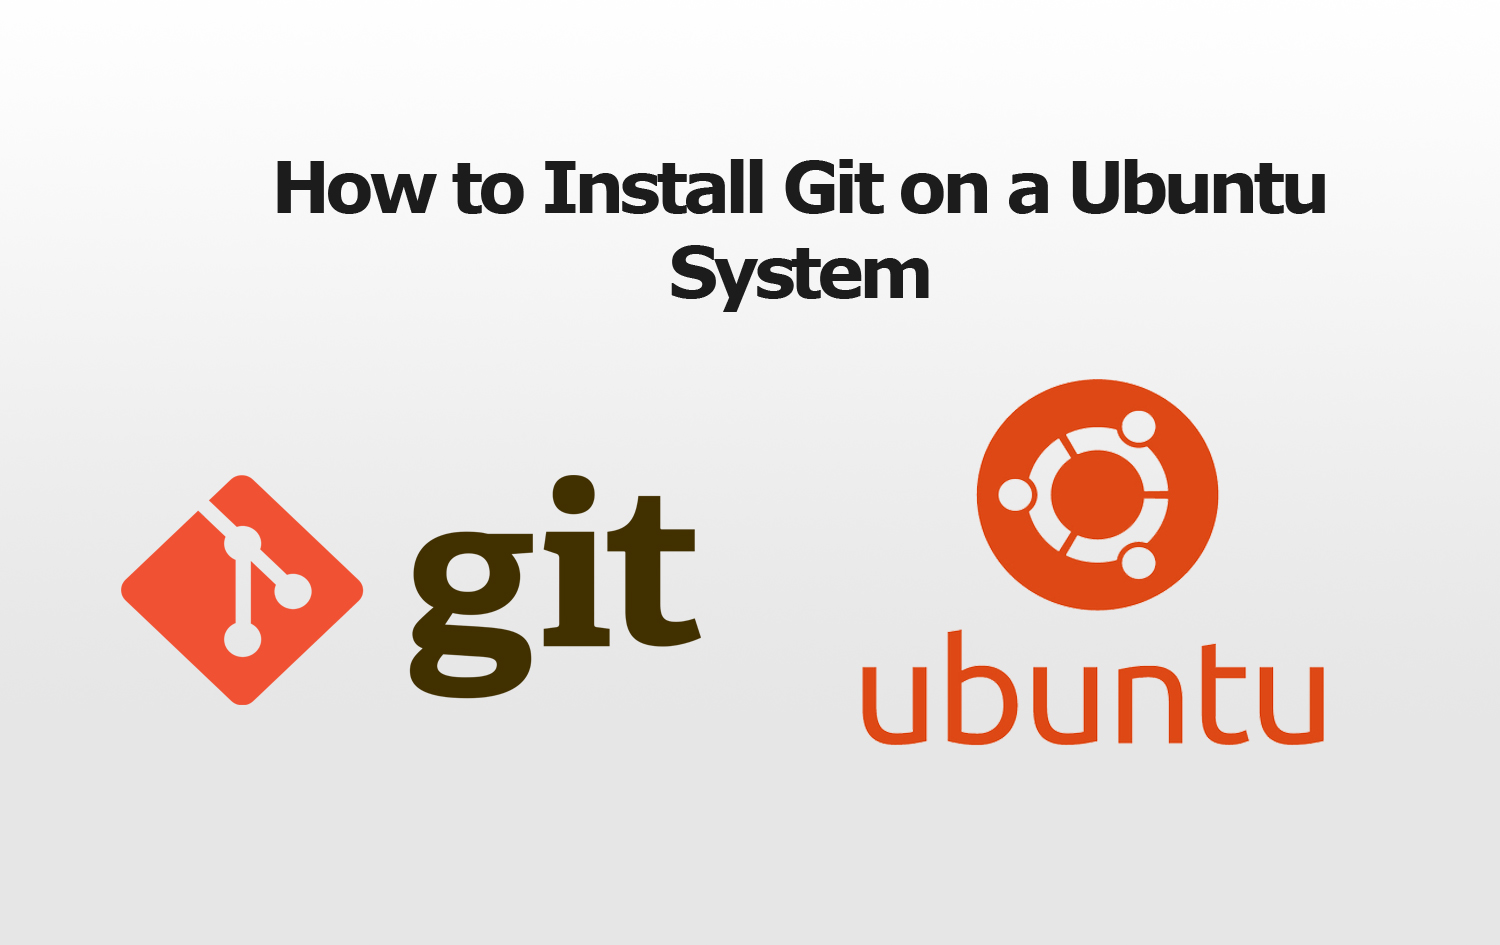 How to Install Git on a Ubuntu System